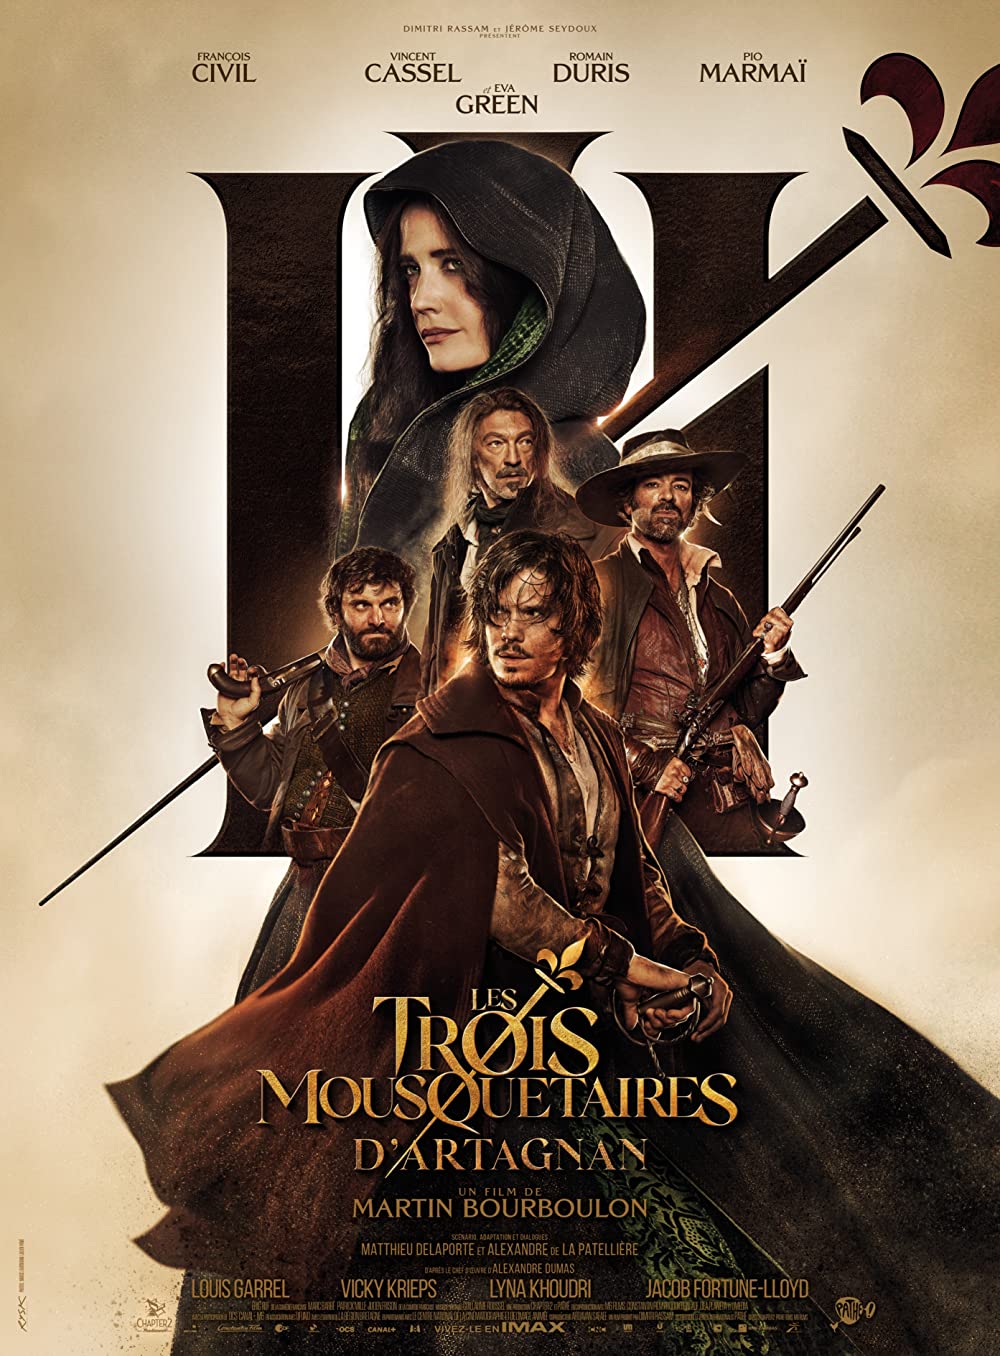 The Three Musketeers: D'Artagnan Movie Poster